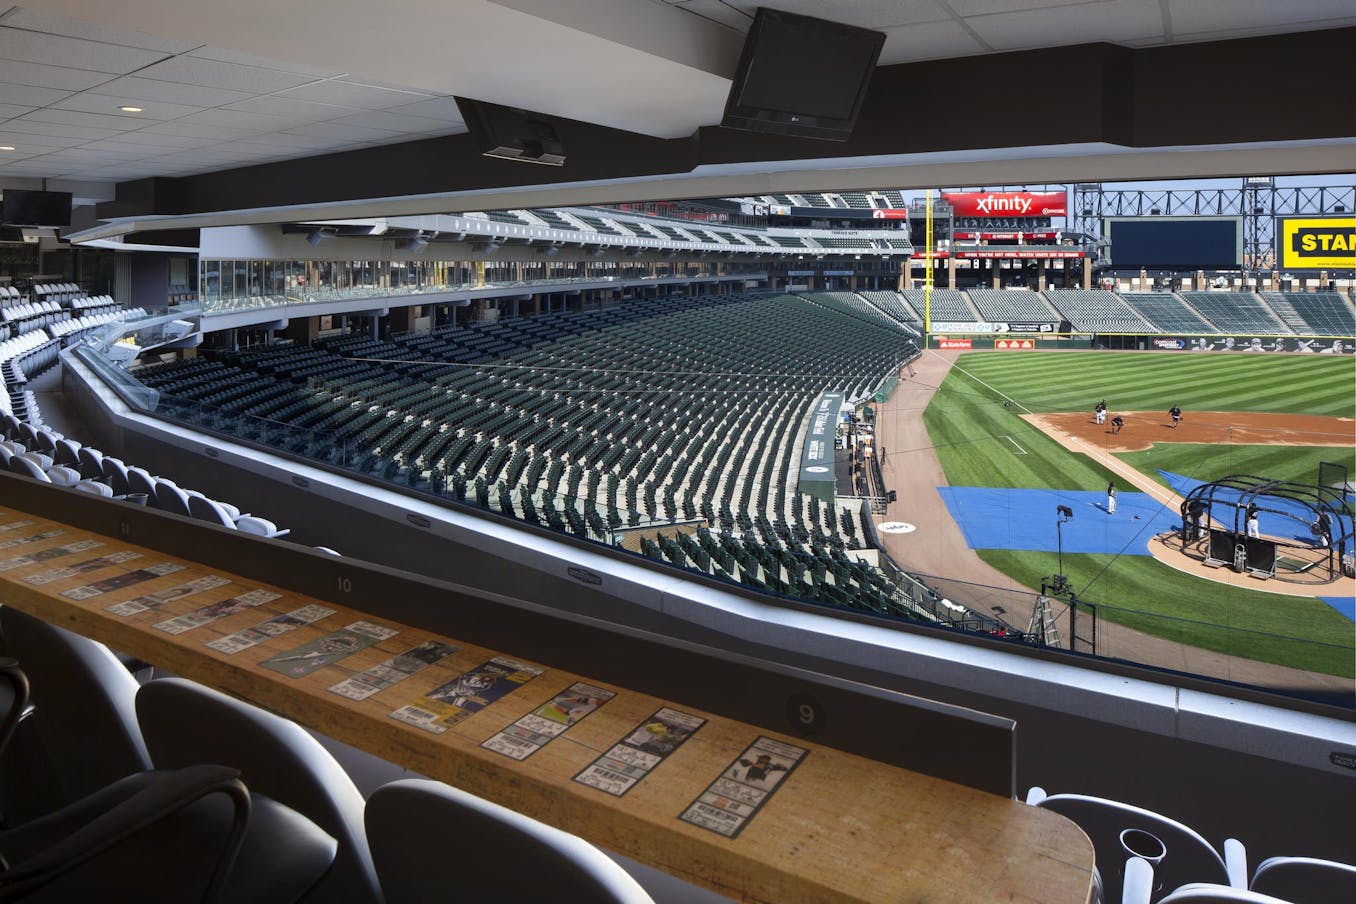 Commercial Sliding Glass Walls at Chicago Whitesox Stadium Arena - Opened Interior Day View